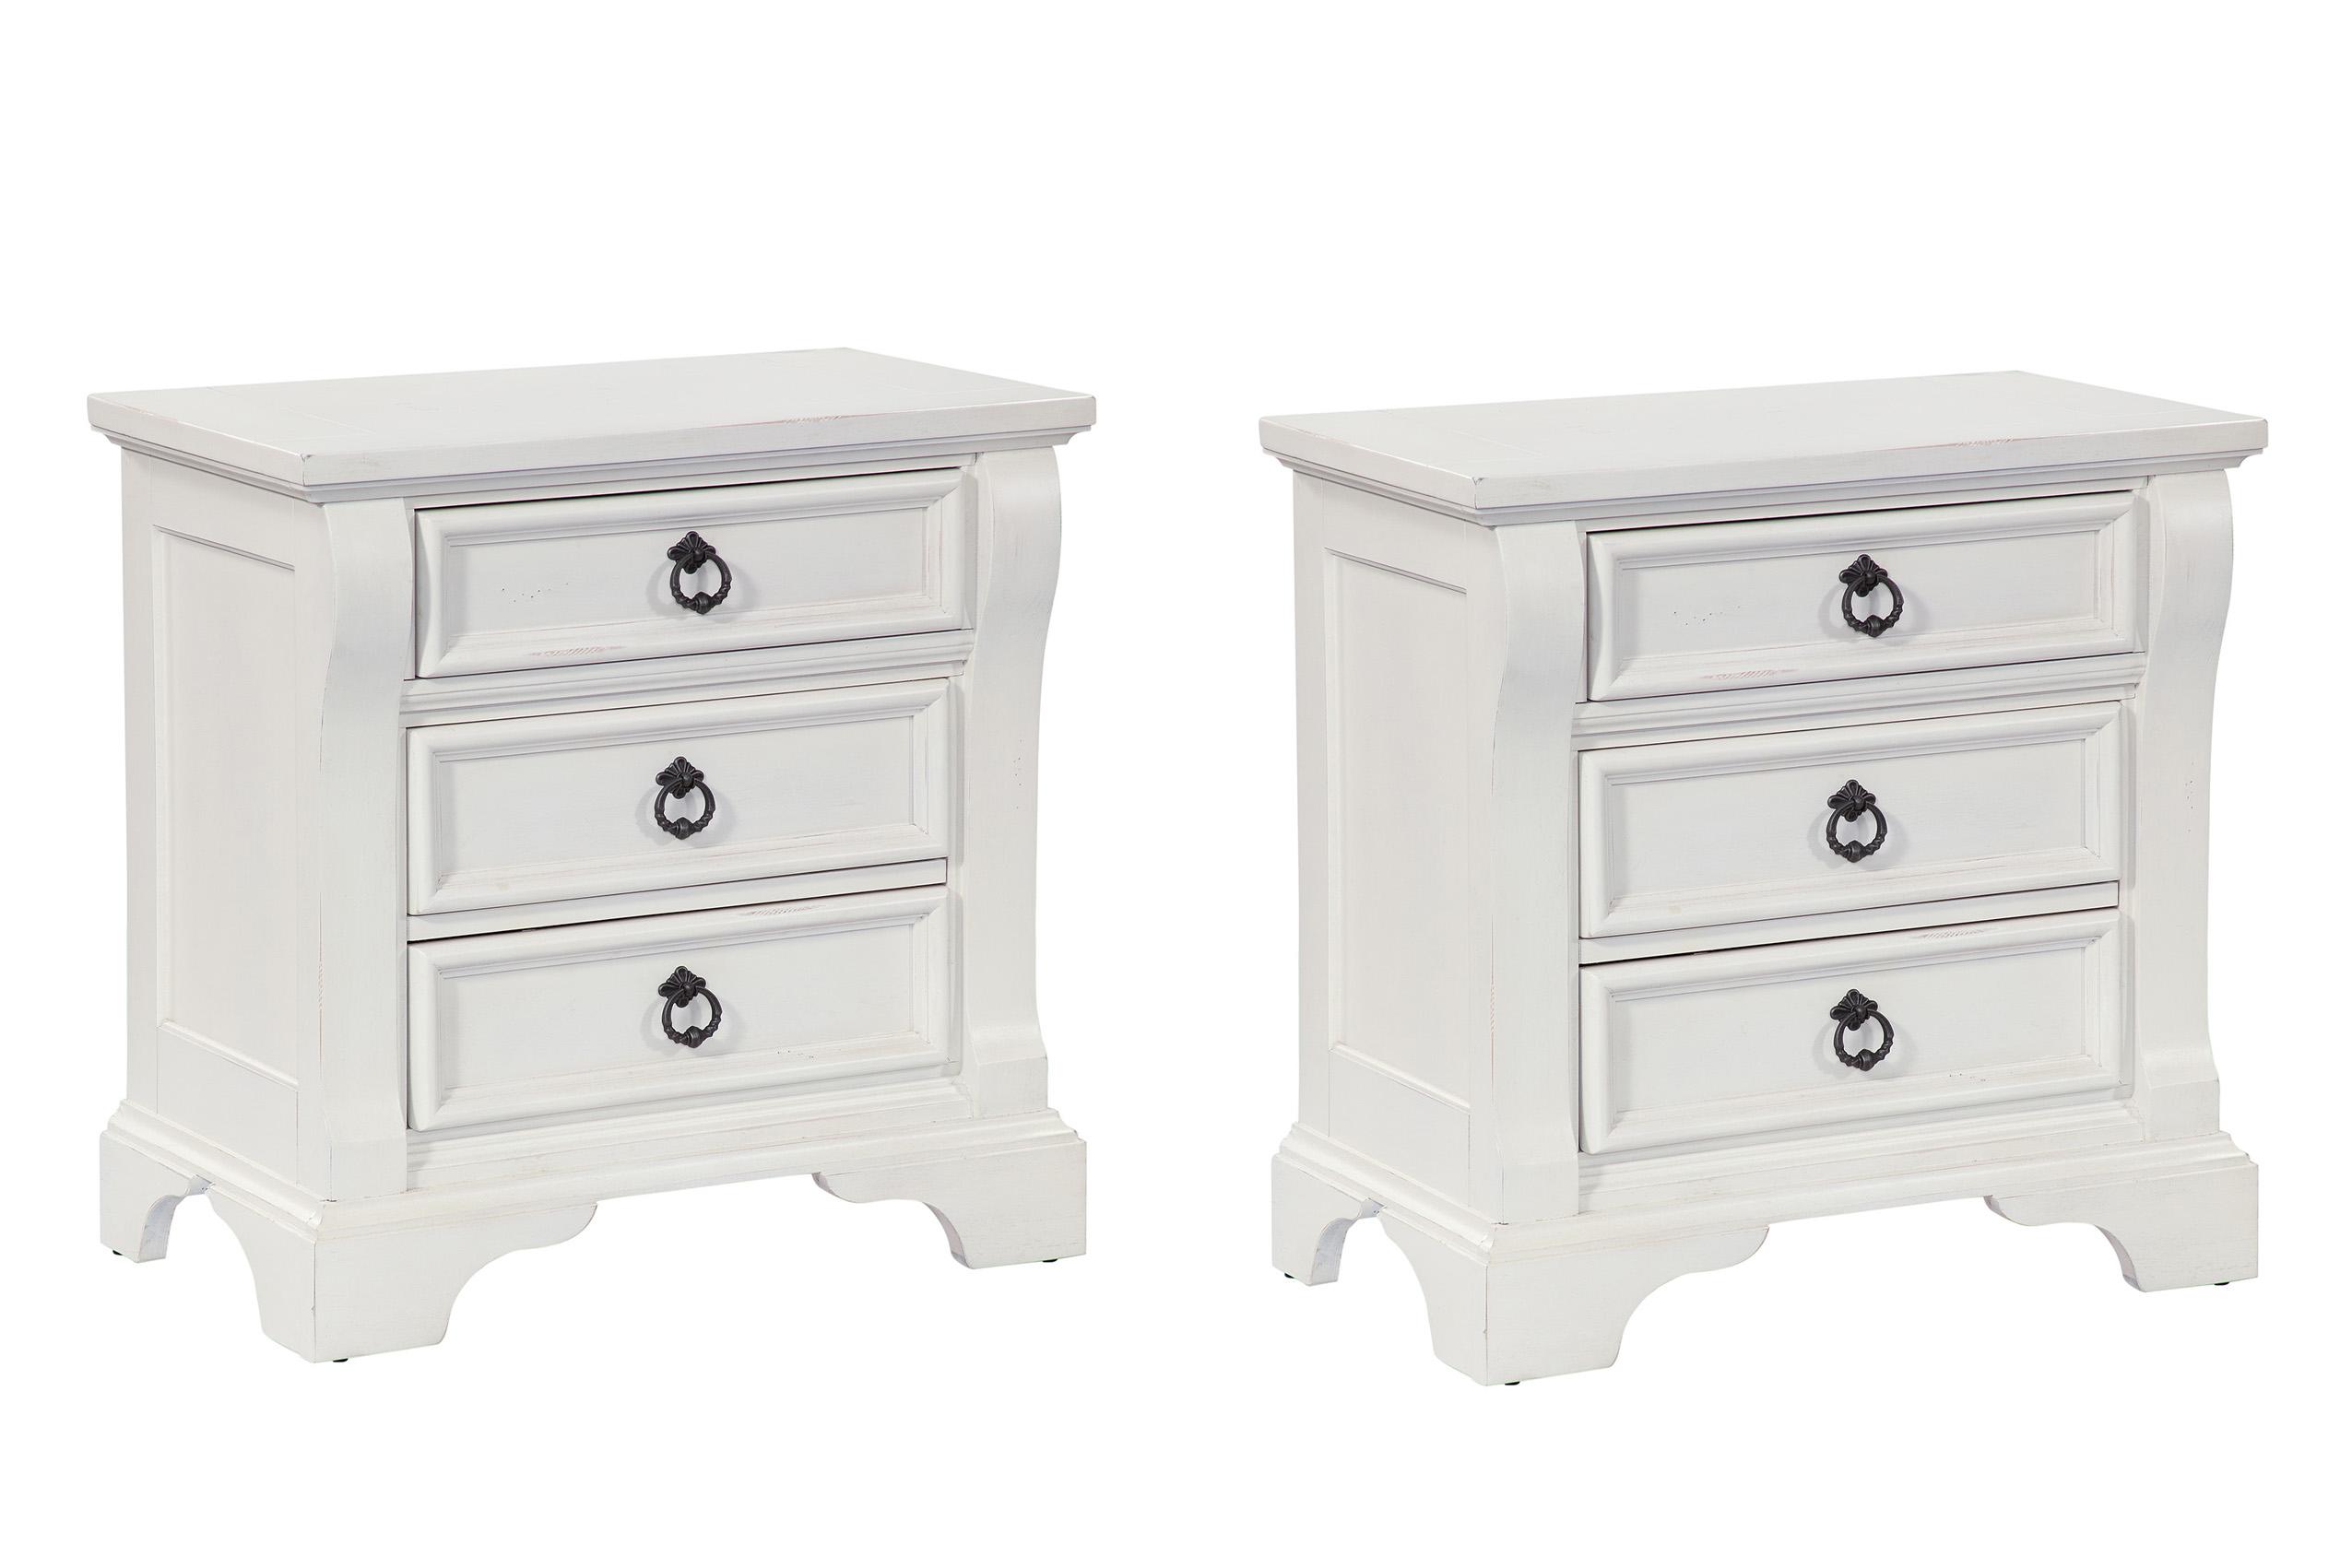 Classic, Traditional, Cottage Nightstand Set HEIRLOOM 2910-430 2910-430-Set-2 in White 